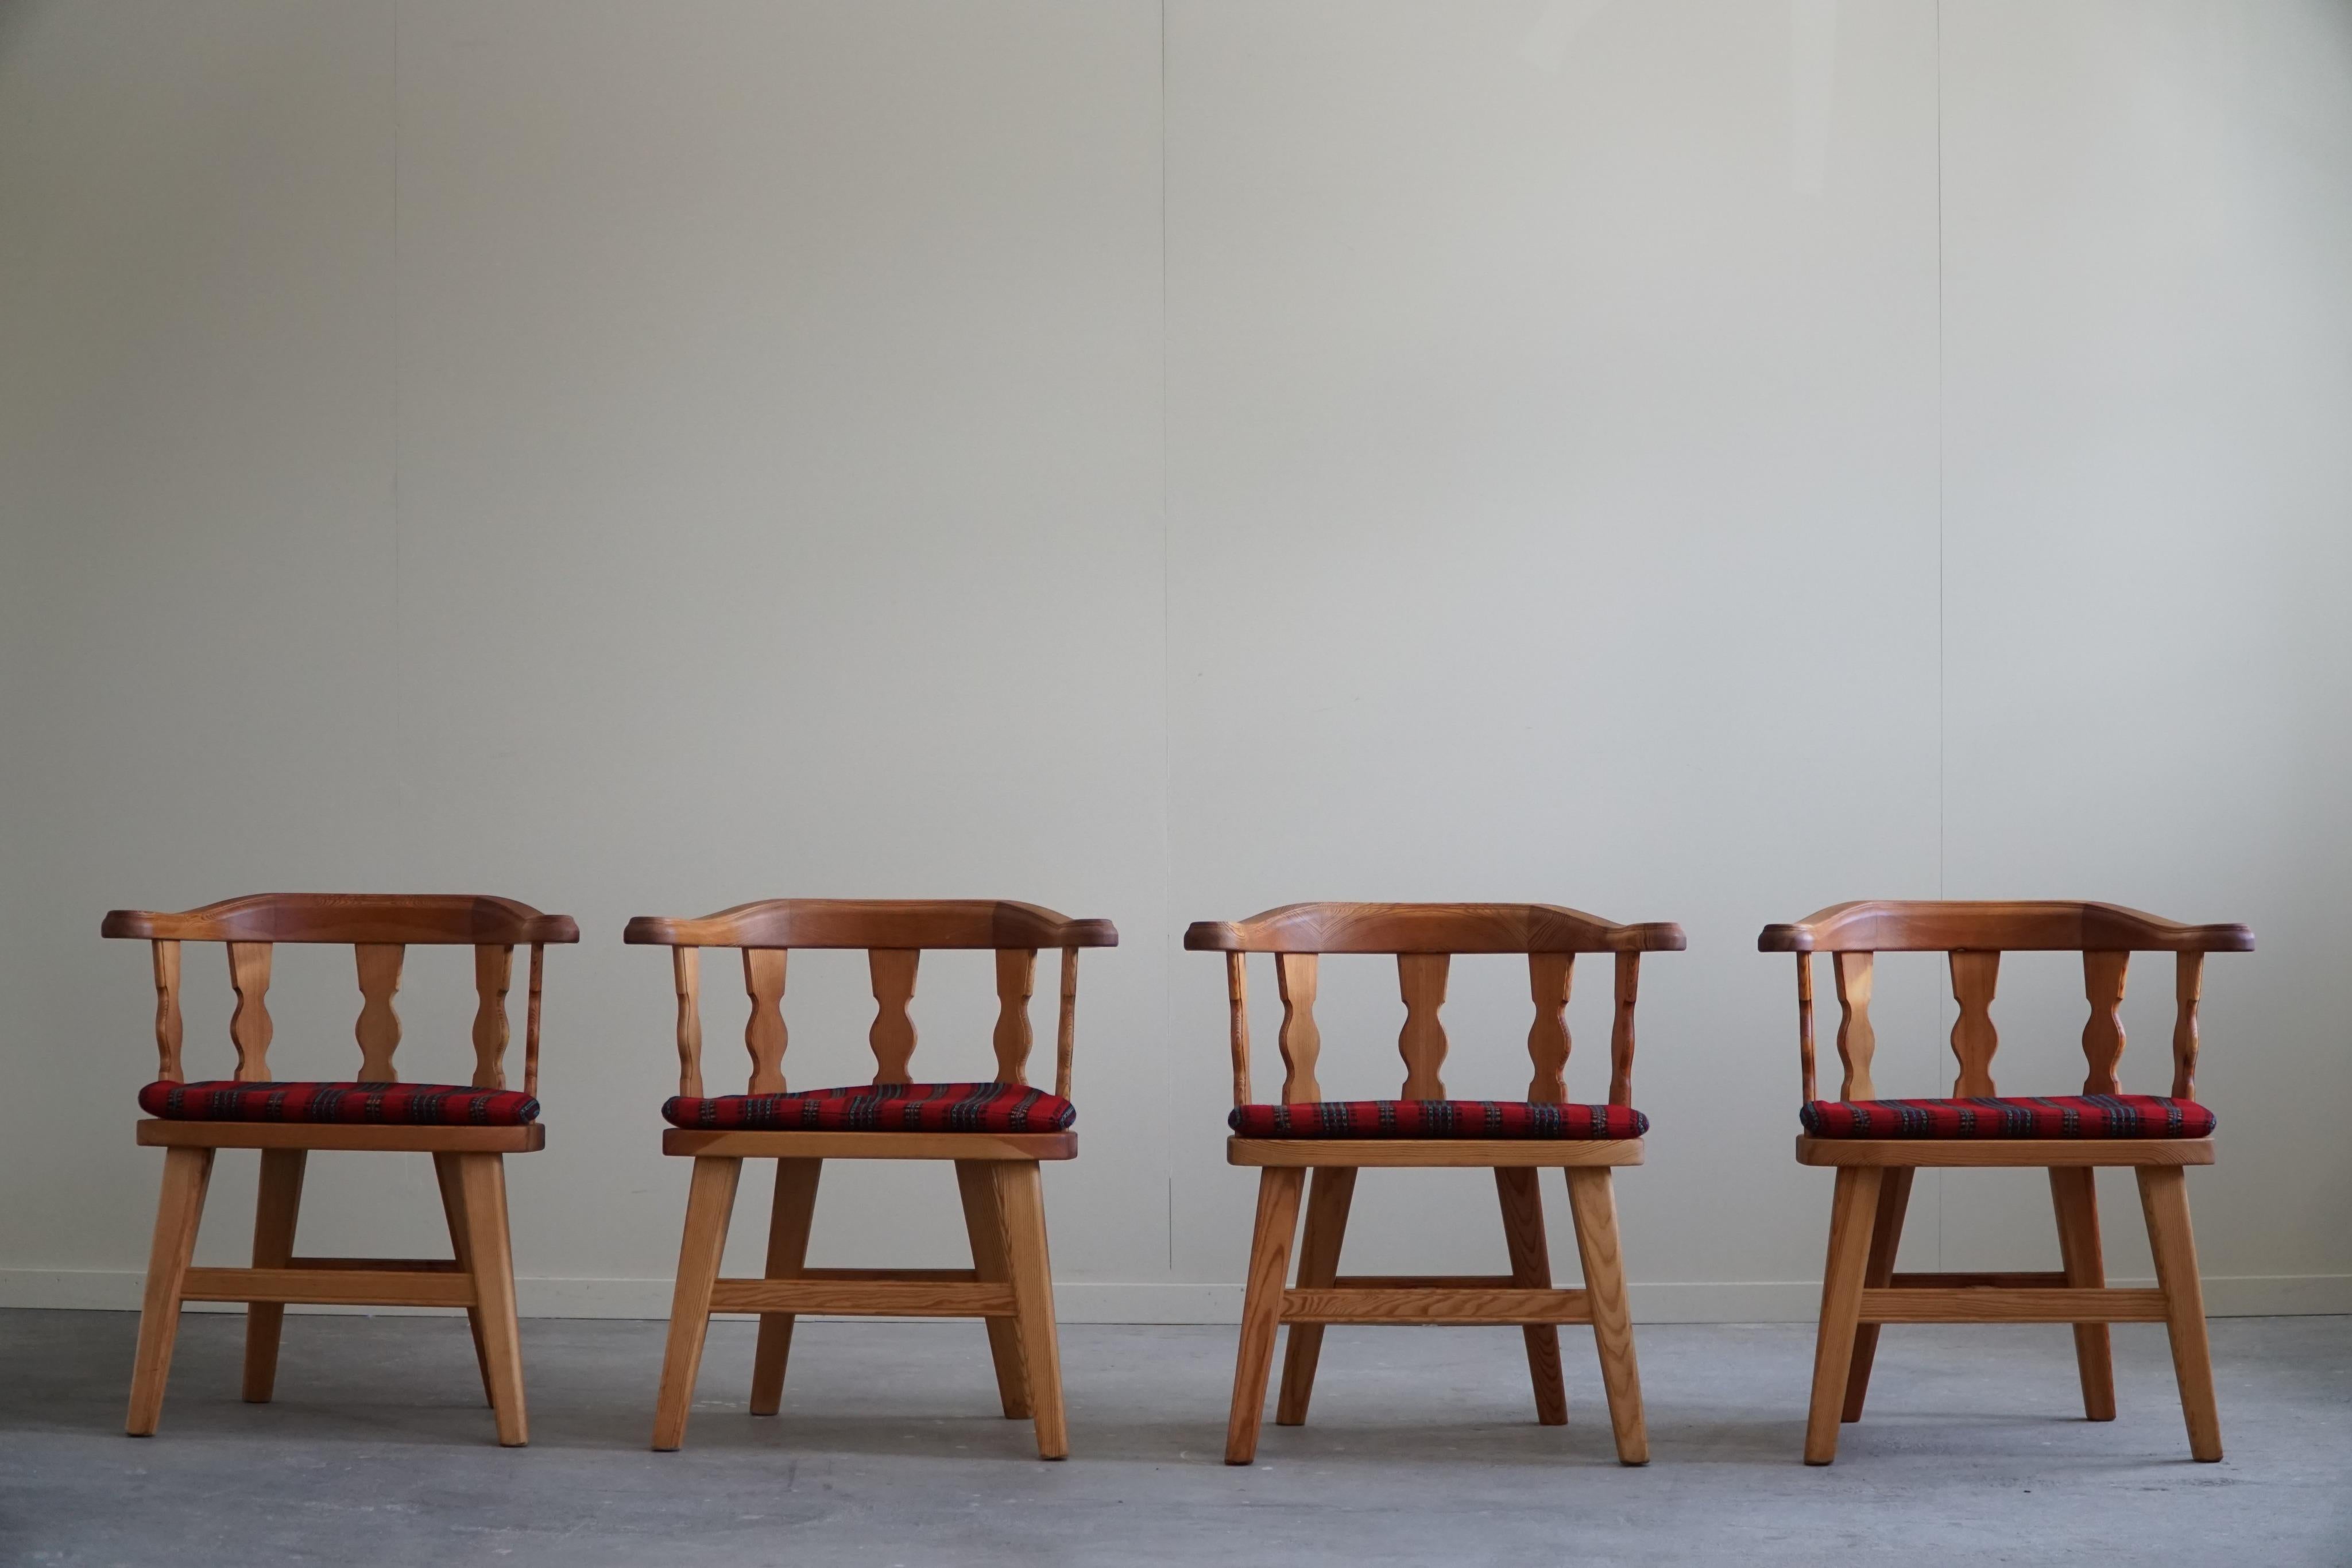 Set of 4 Norwegian Modern Armchairs by Krogenæs, Solid Pine, 1950s For Sale 12